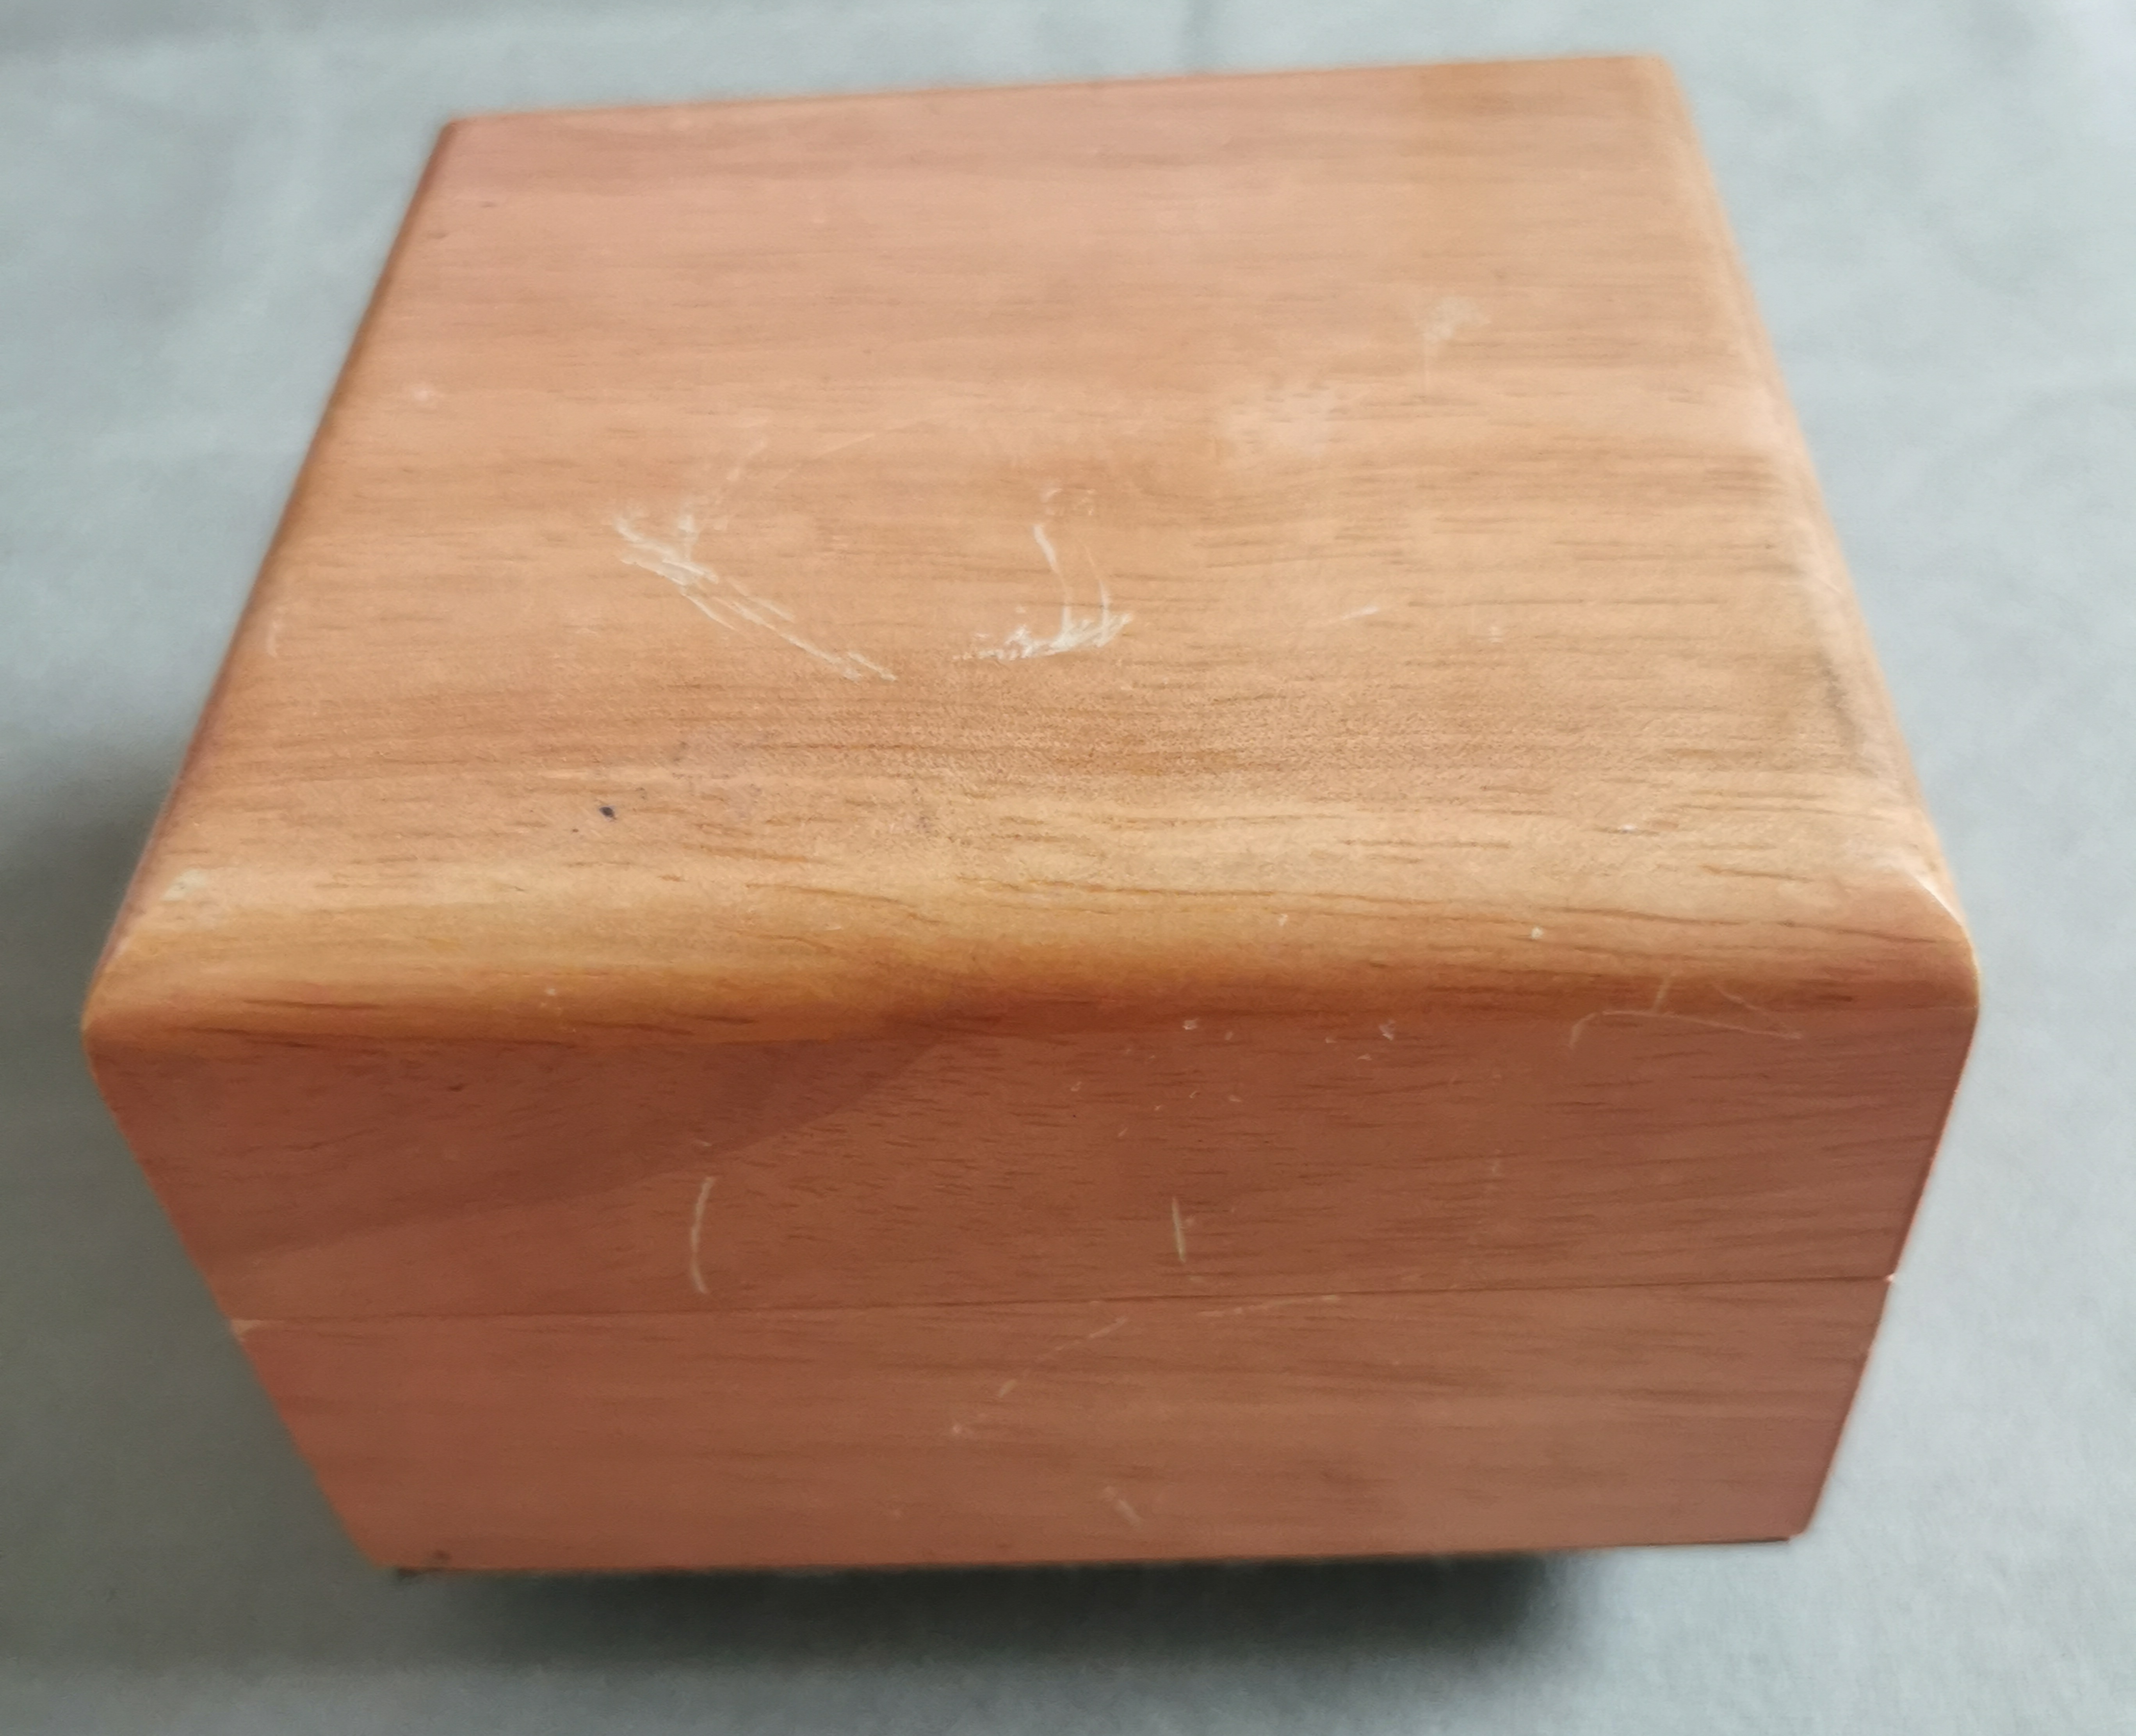 Glycine Vintage wooden watch box for any models in used condition | San Giorgio a Cremano